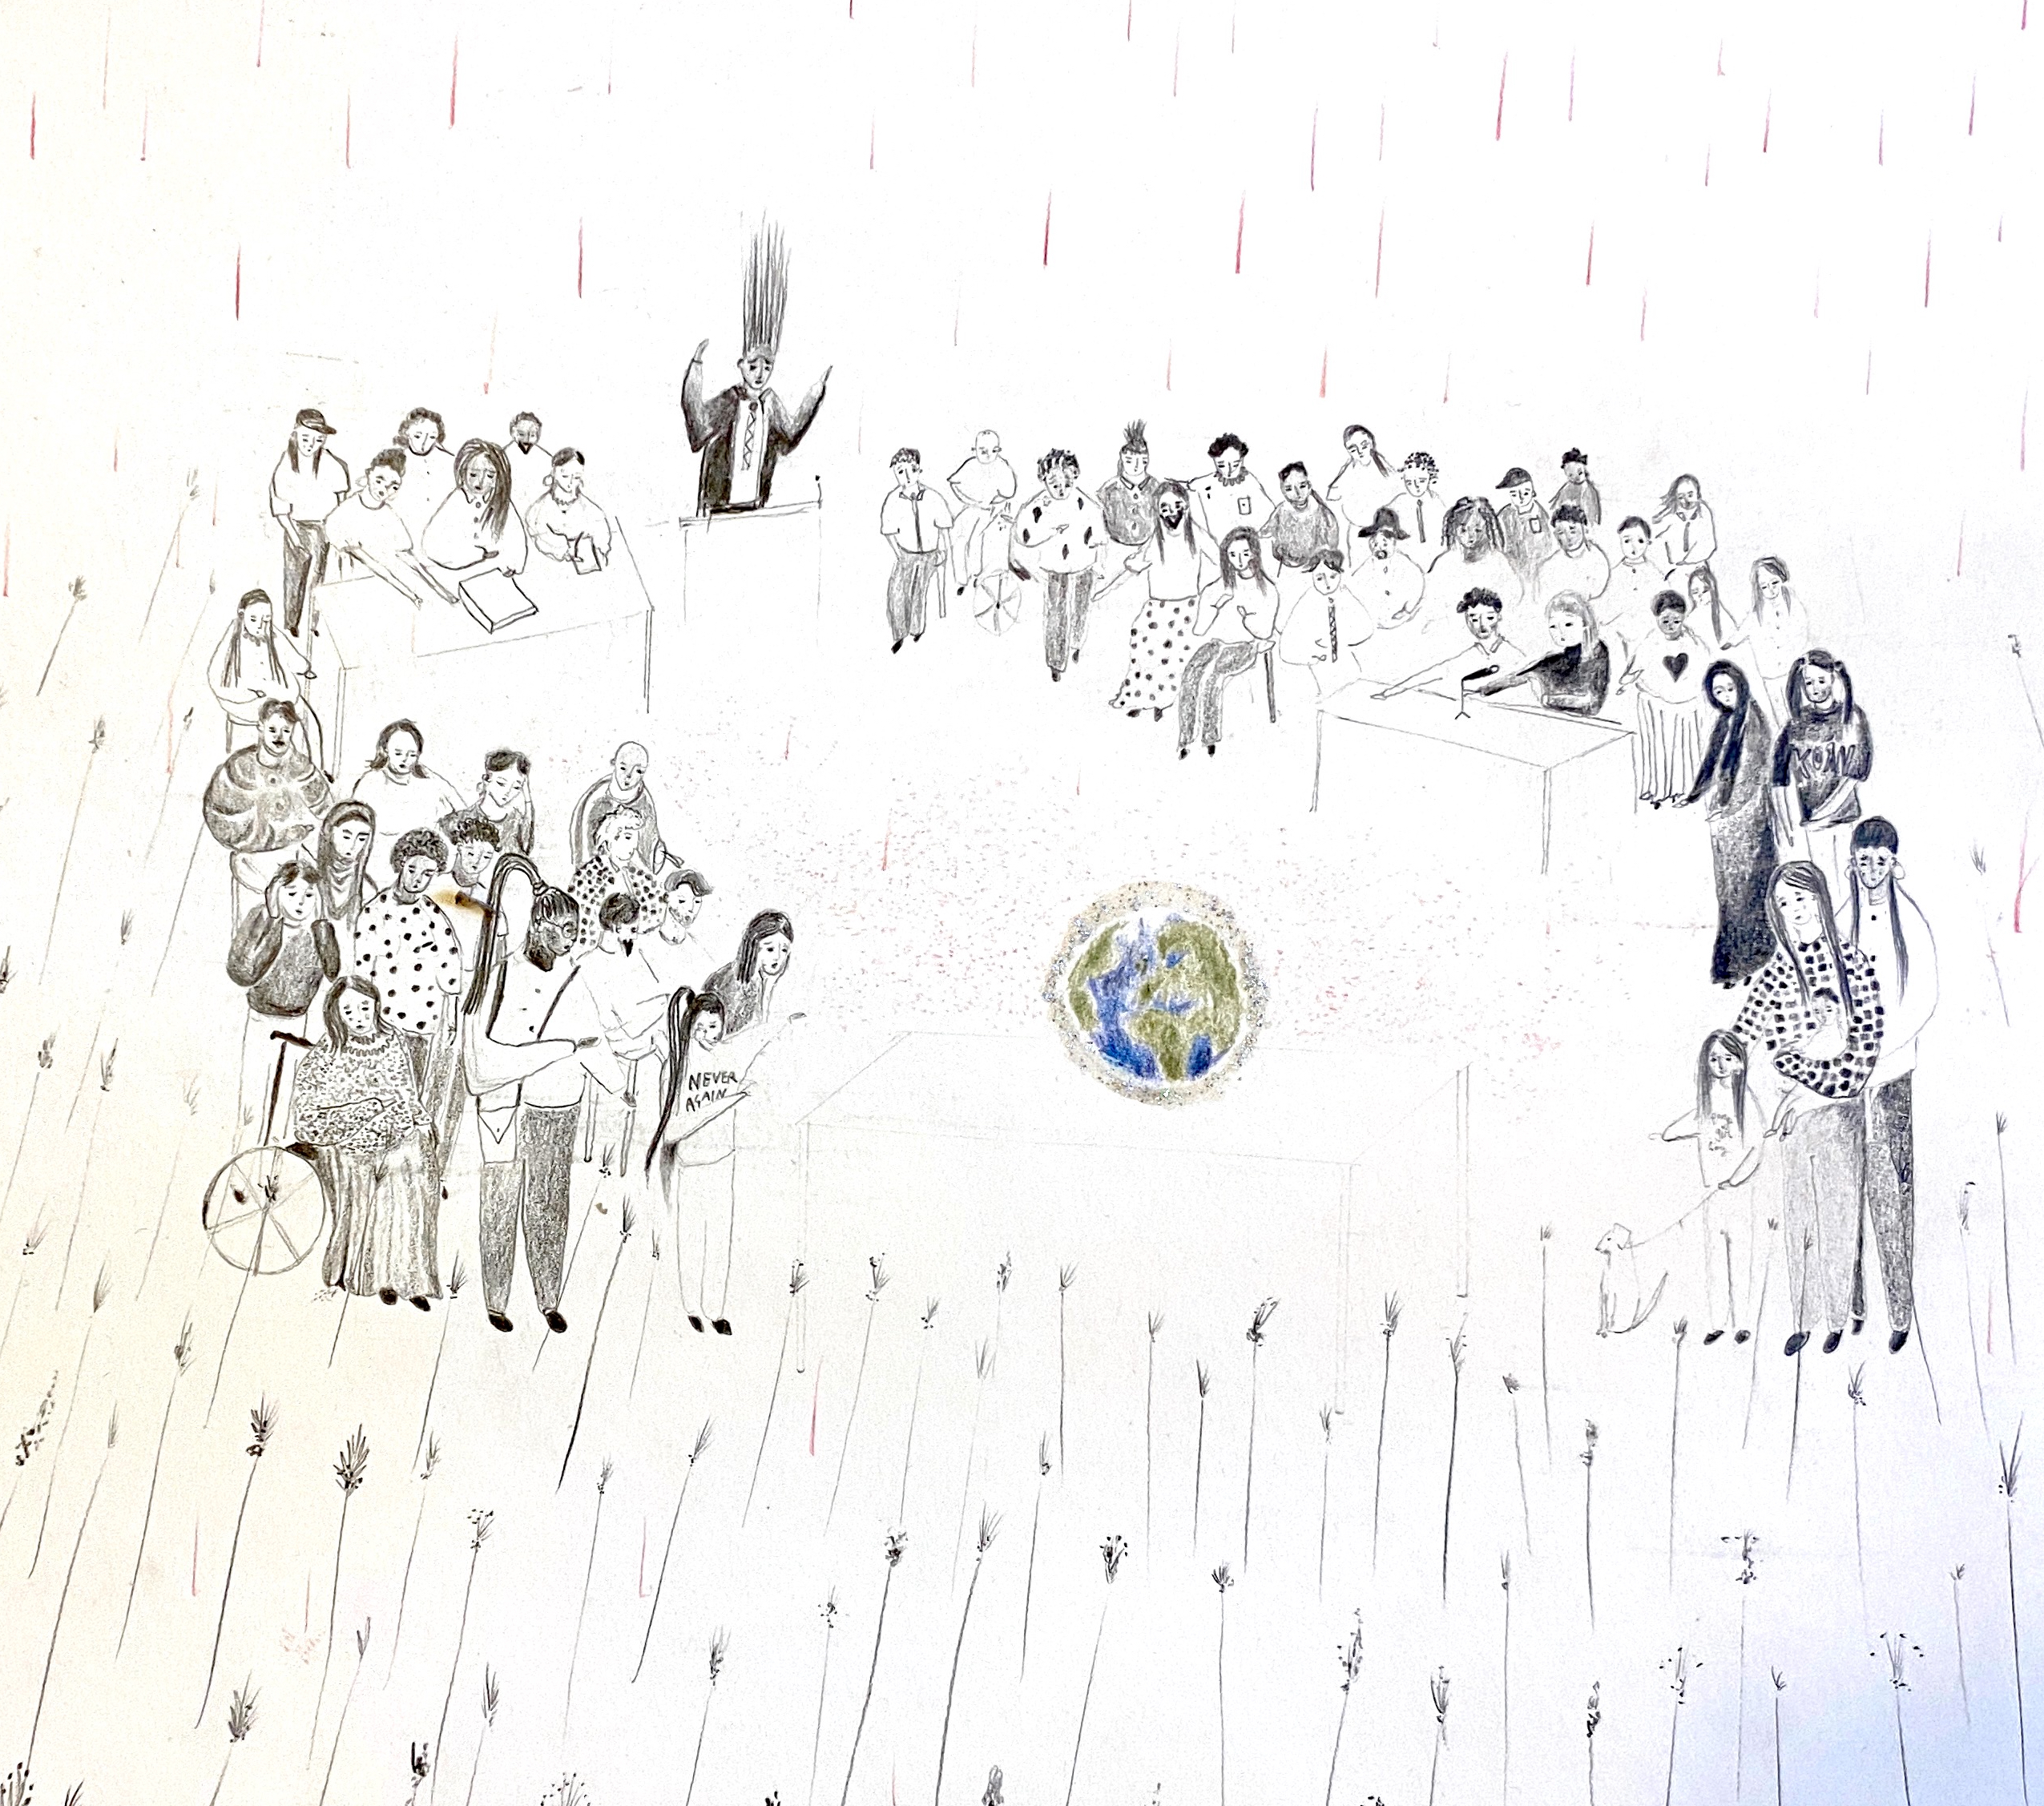 Hand drawing showing a gathering of around 30 people  of many ages, ethnicities along with pet and wheelchairs  congregated around a small representation of the earth